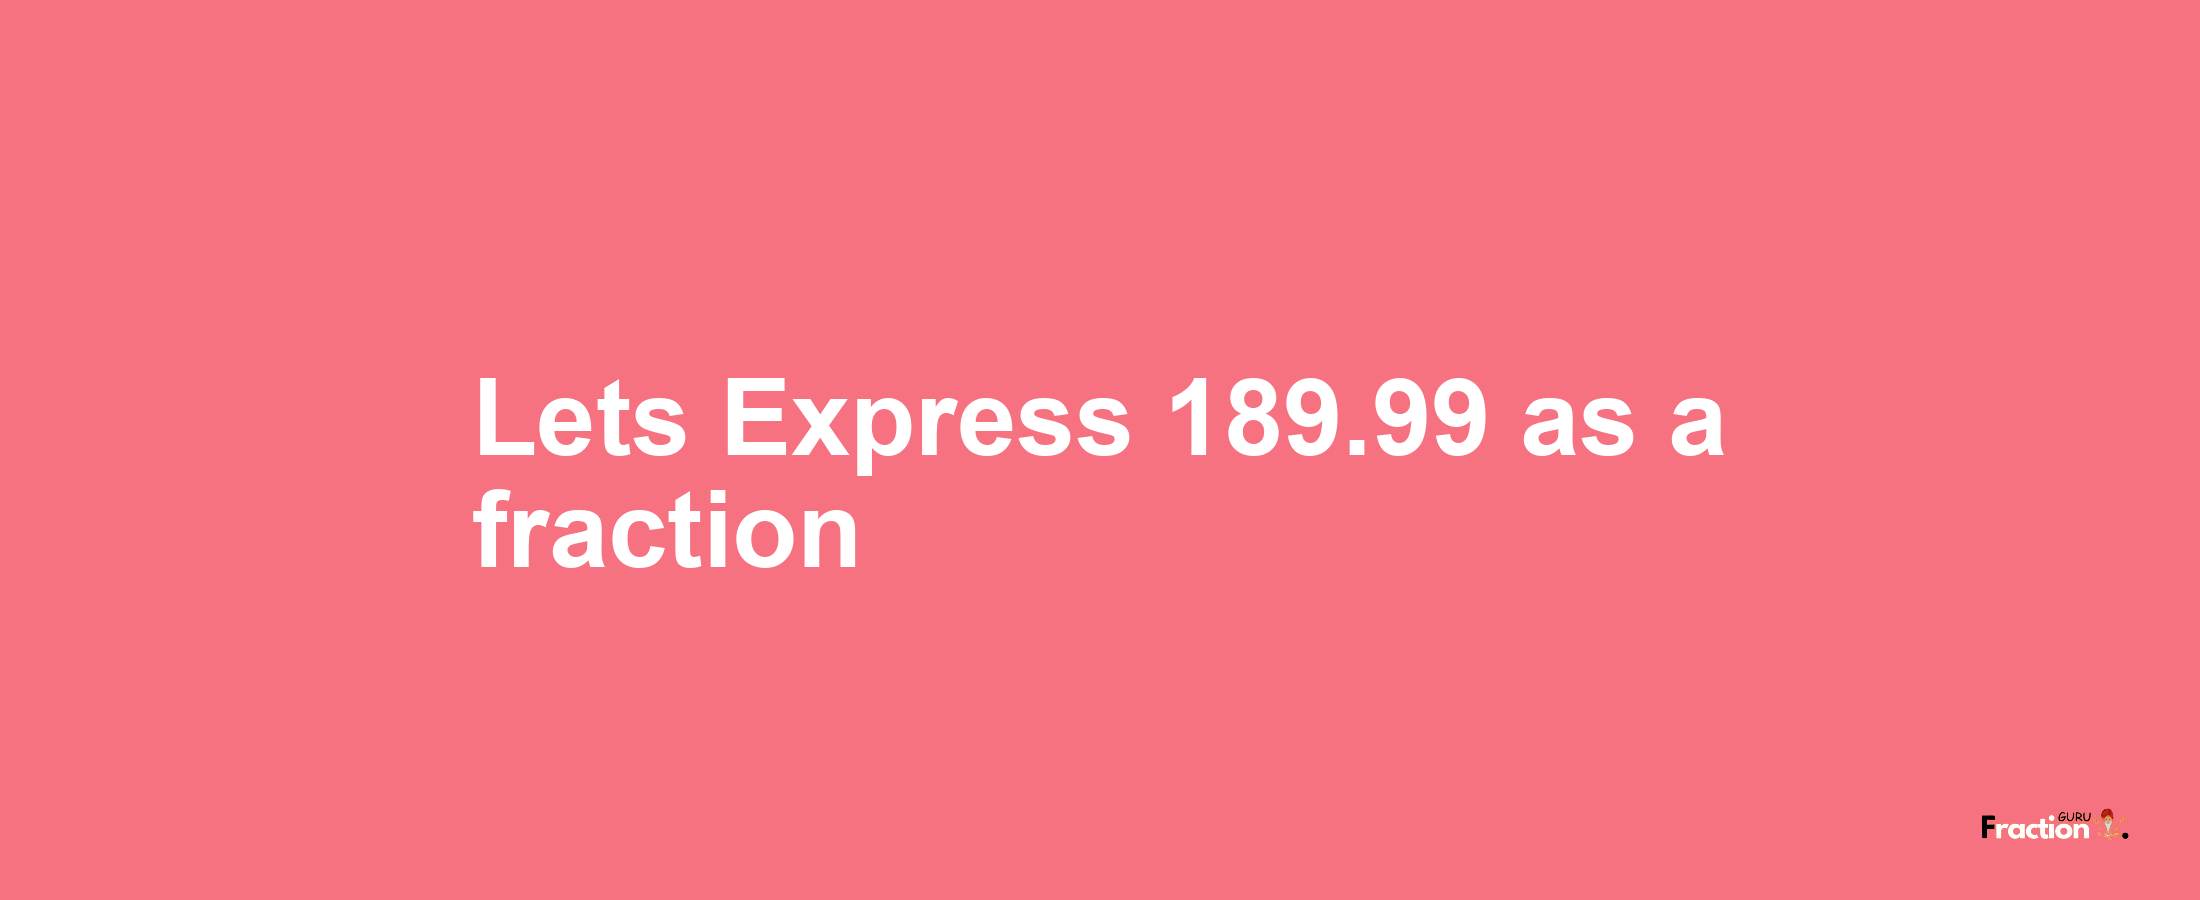 Lets Express 189.99 as afraction